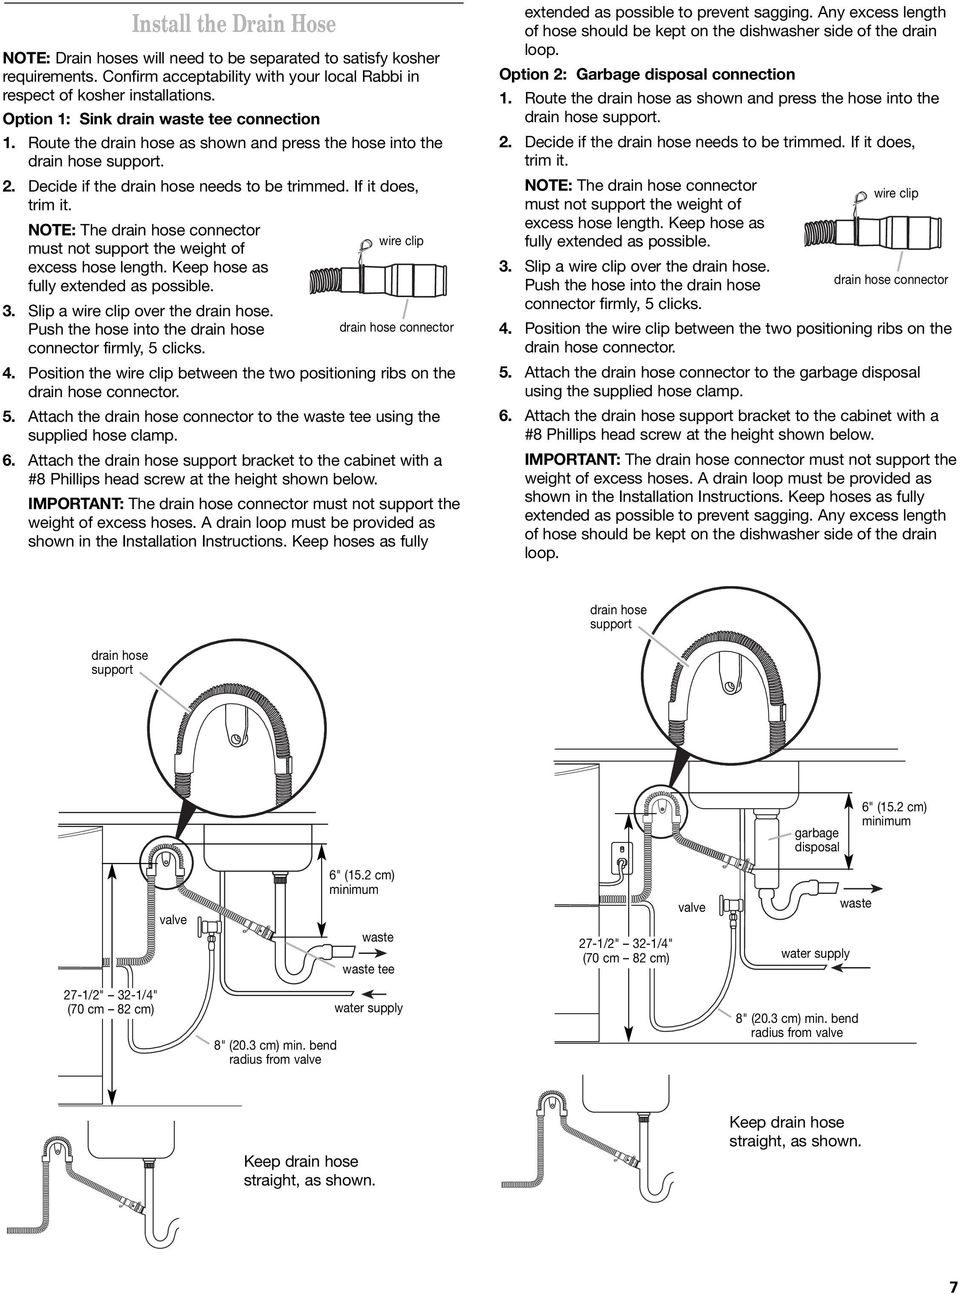 NOTE: The drain hose connector wire clip must not support the weight of excess hose length. Keep hose as fully extended as possible. 3. Slip a wire clip over the drain hose.